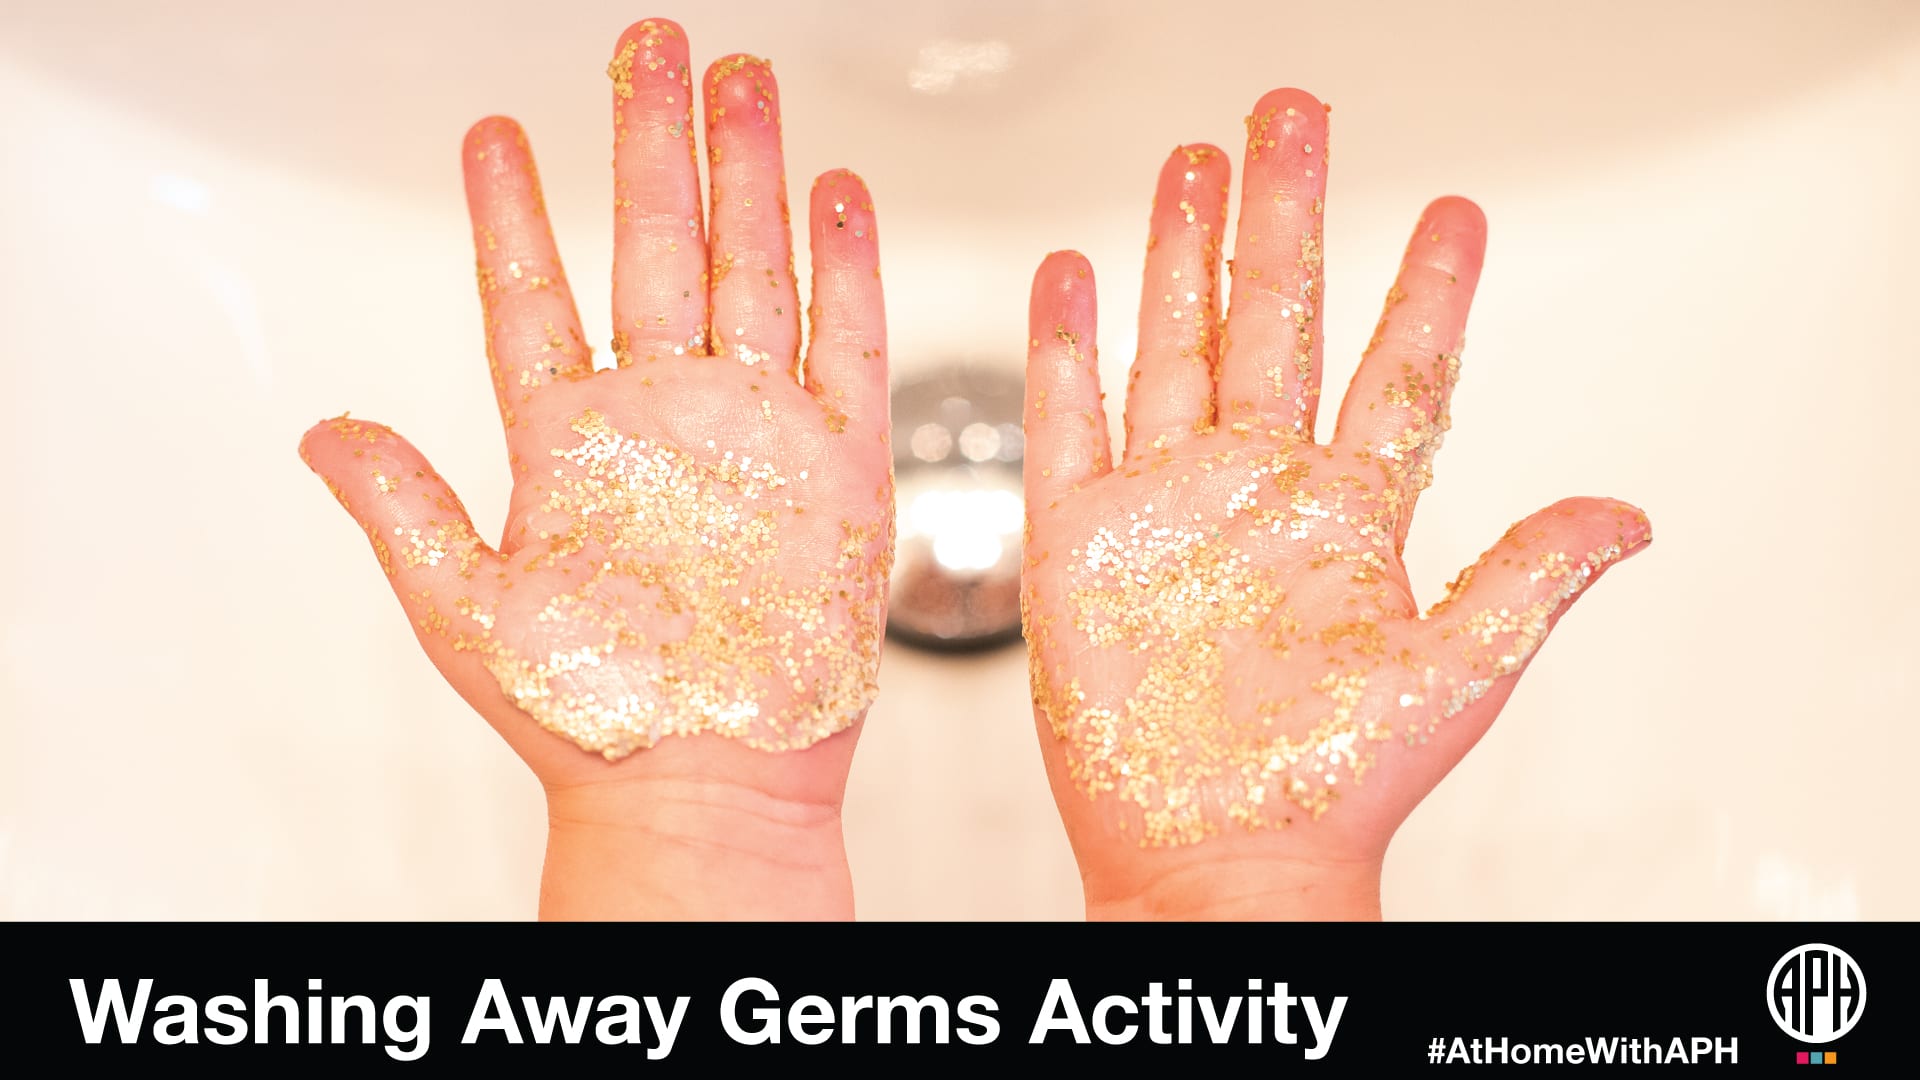 a child's hands covered in glitter. text reads "Washing away germs activity #AtHomeWithAPH" APH logo